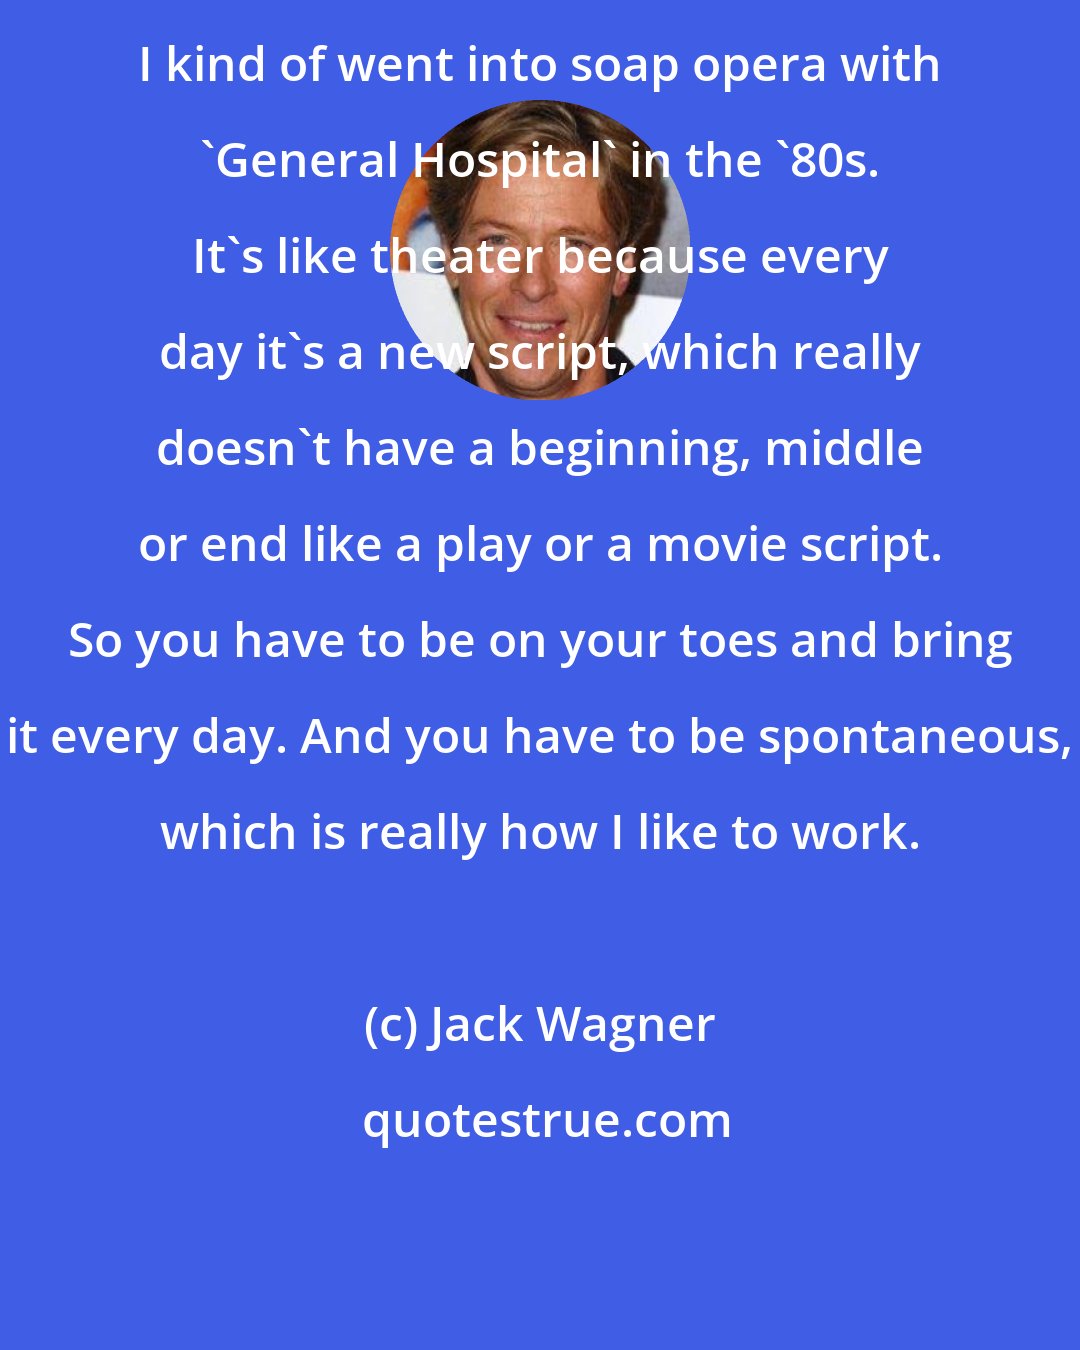 Jack Wagner: I kind of went into soap opera with 'General Hospital' in the '80s. It's like theater because every day it's a new script, which really doesn't have a beginning, middle or end like a play or a movie script. So you have to be on your toes and bring it every day. And you have to be spontaneous, which is really how I like to work.